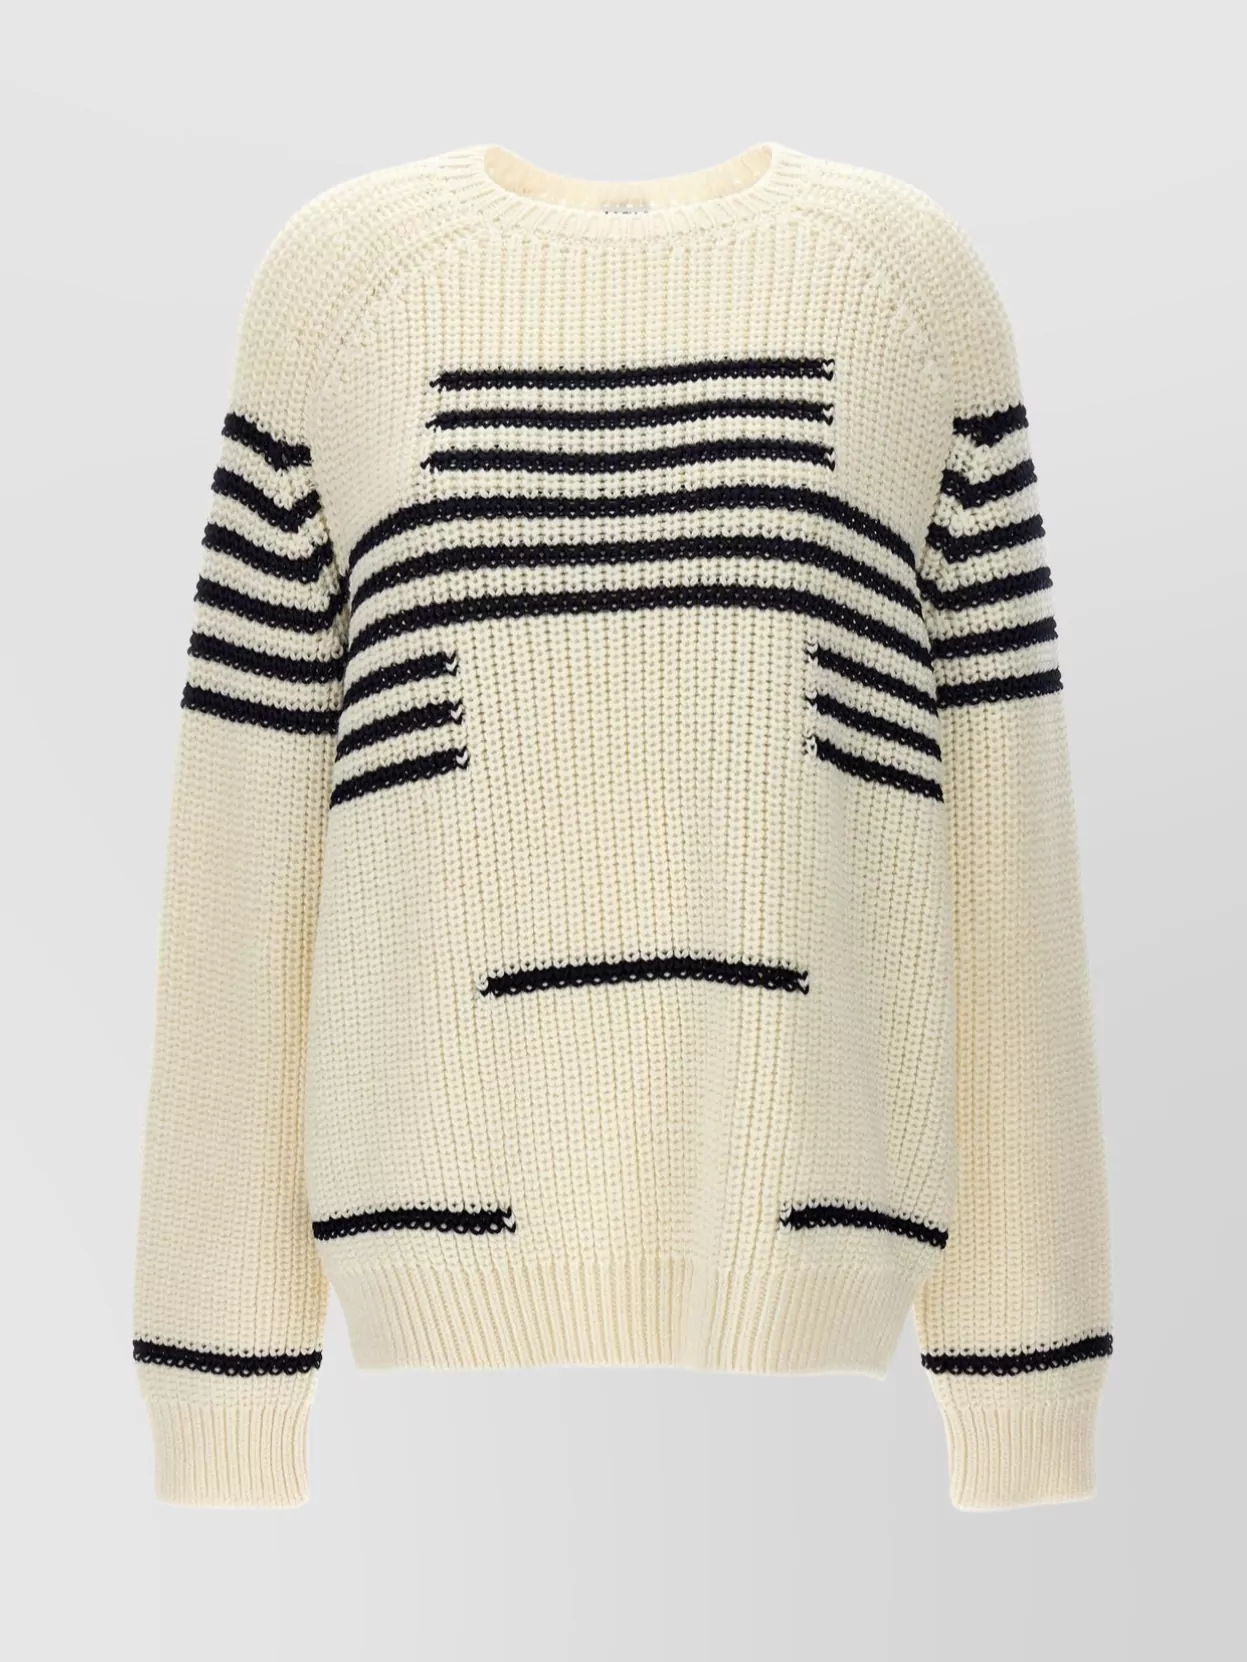 Loewe Striped Crew Neck Knit Sweater In Neutral